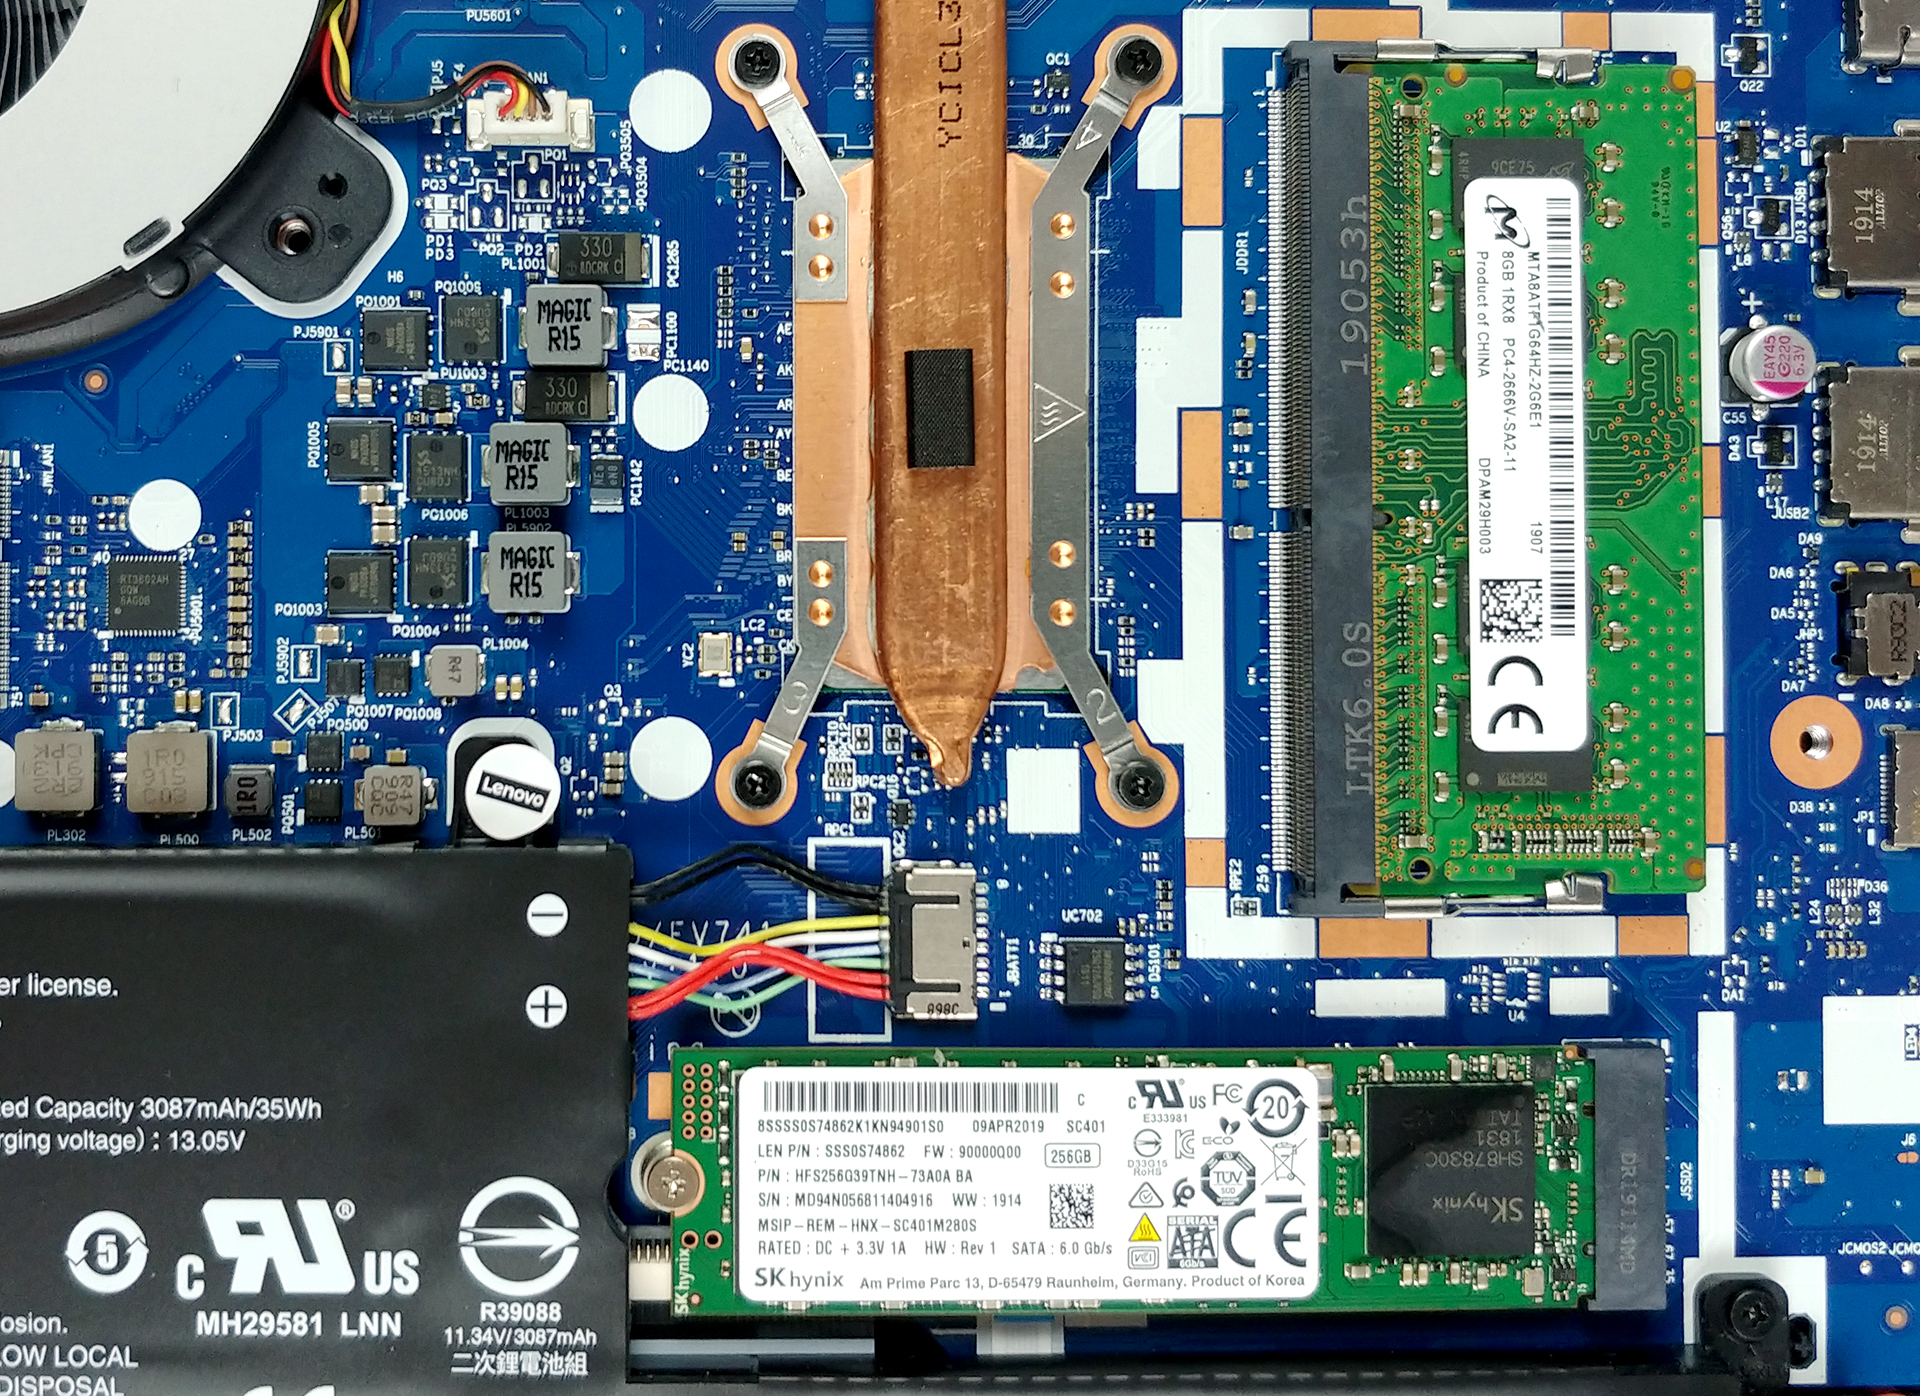 Inside Lenovo L340 (15") - disassembly and upgrade options |